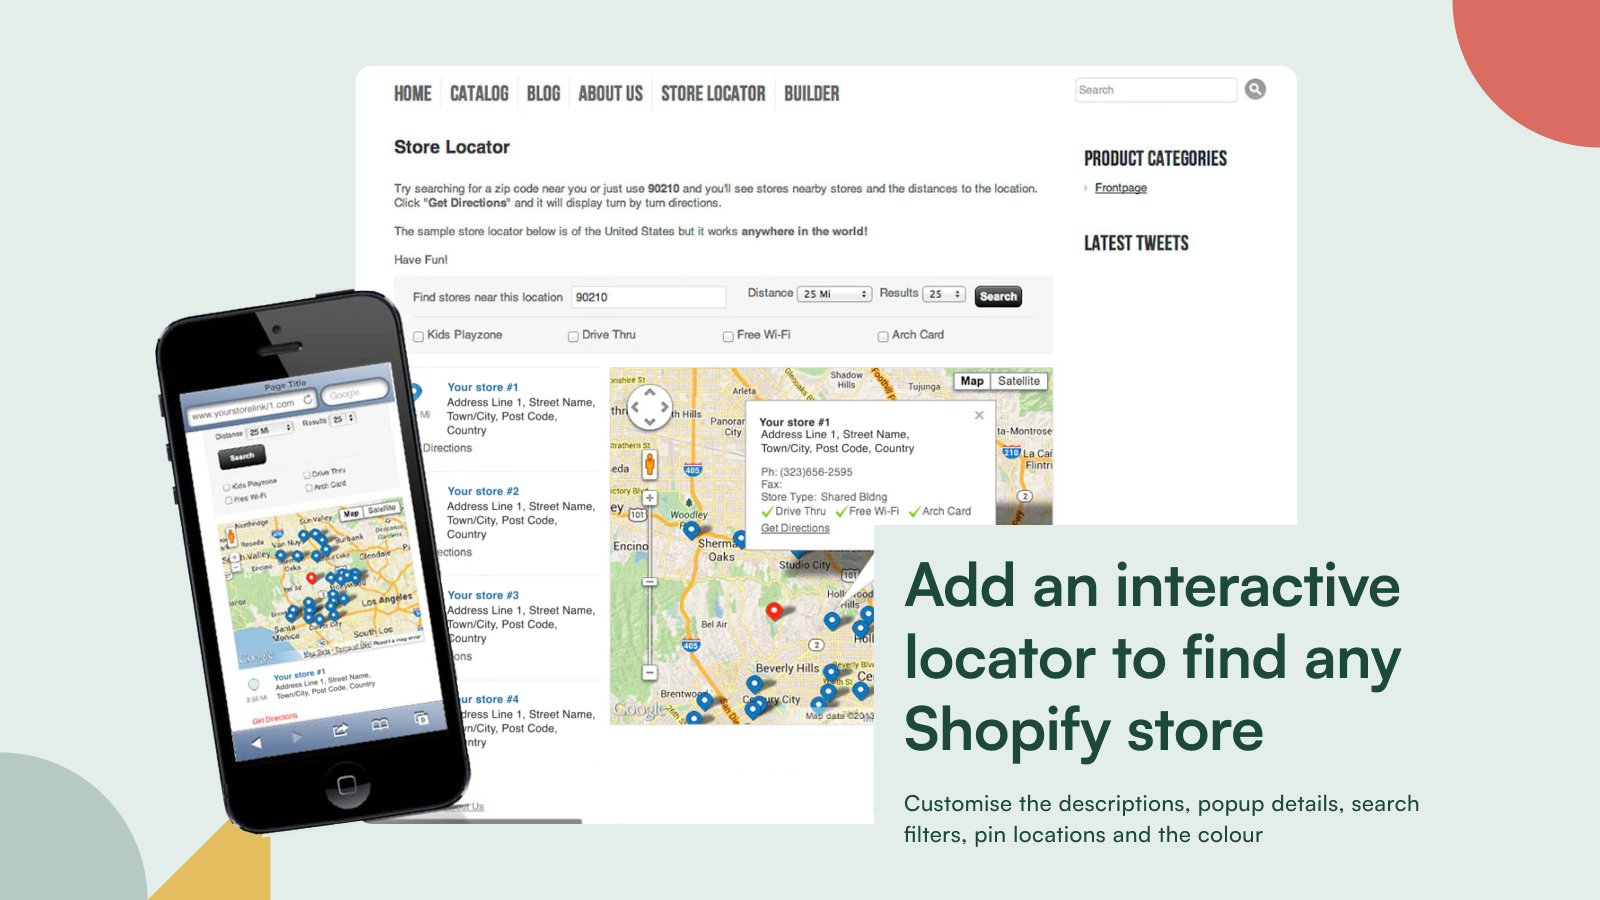 Add an interactive locator to find any shopify store